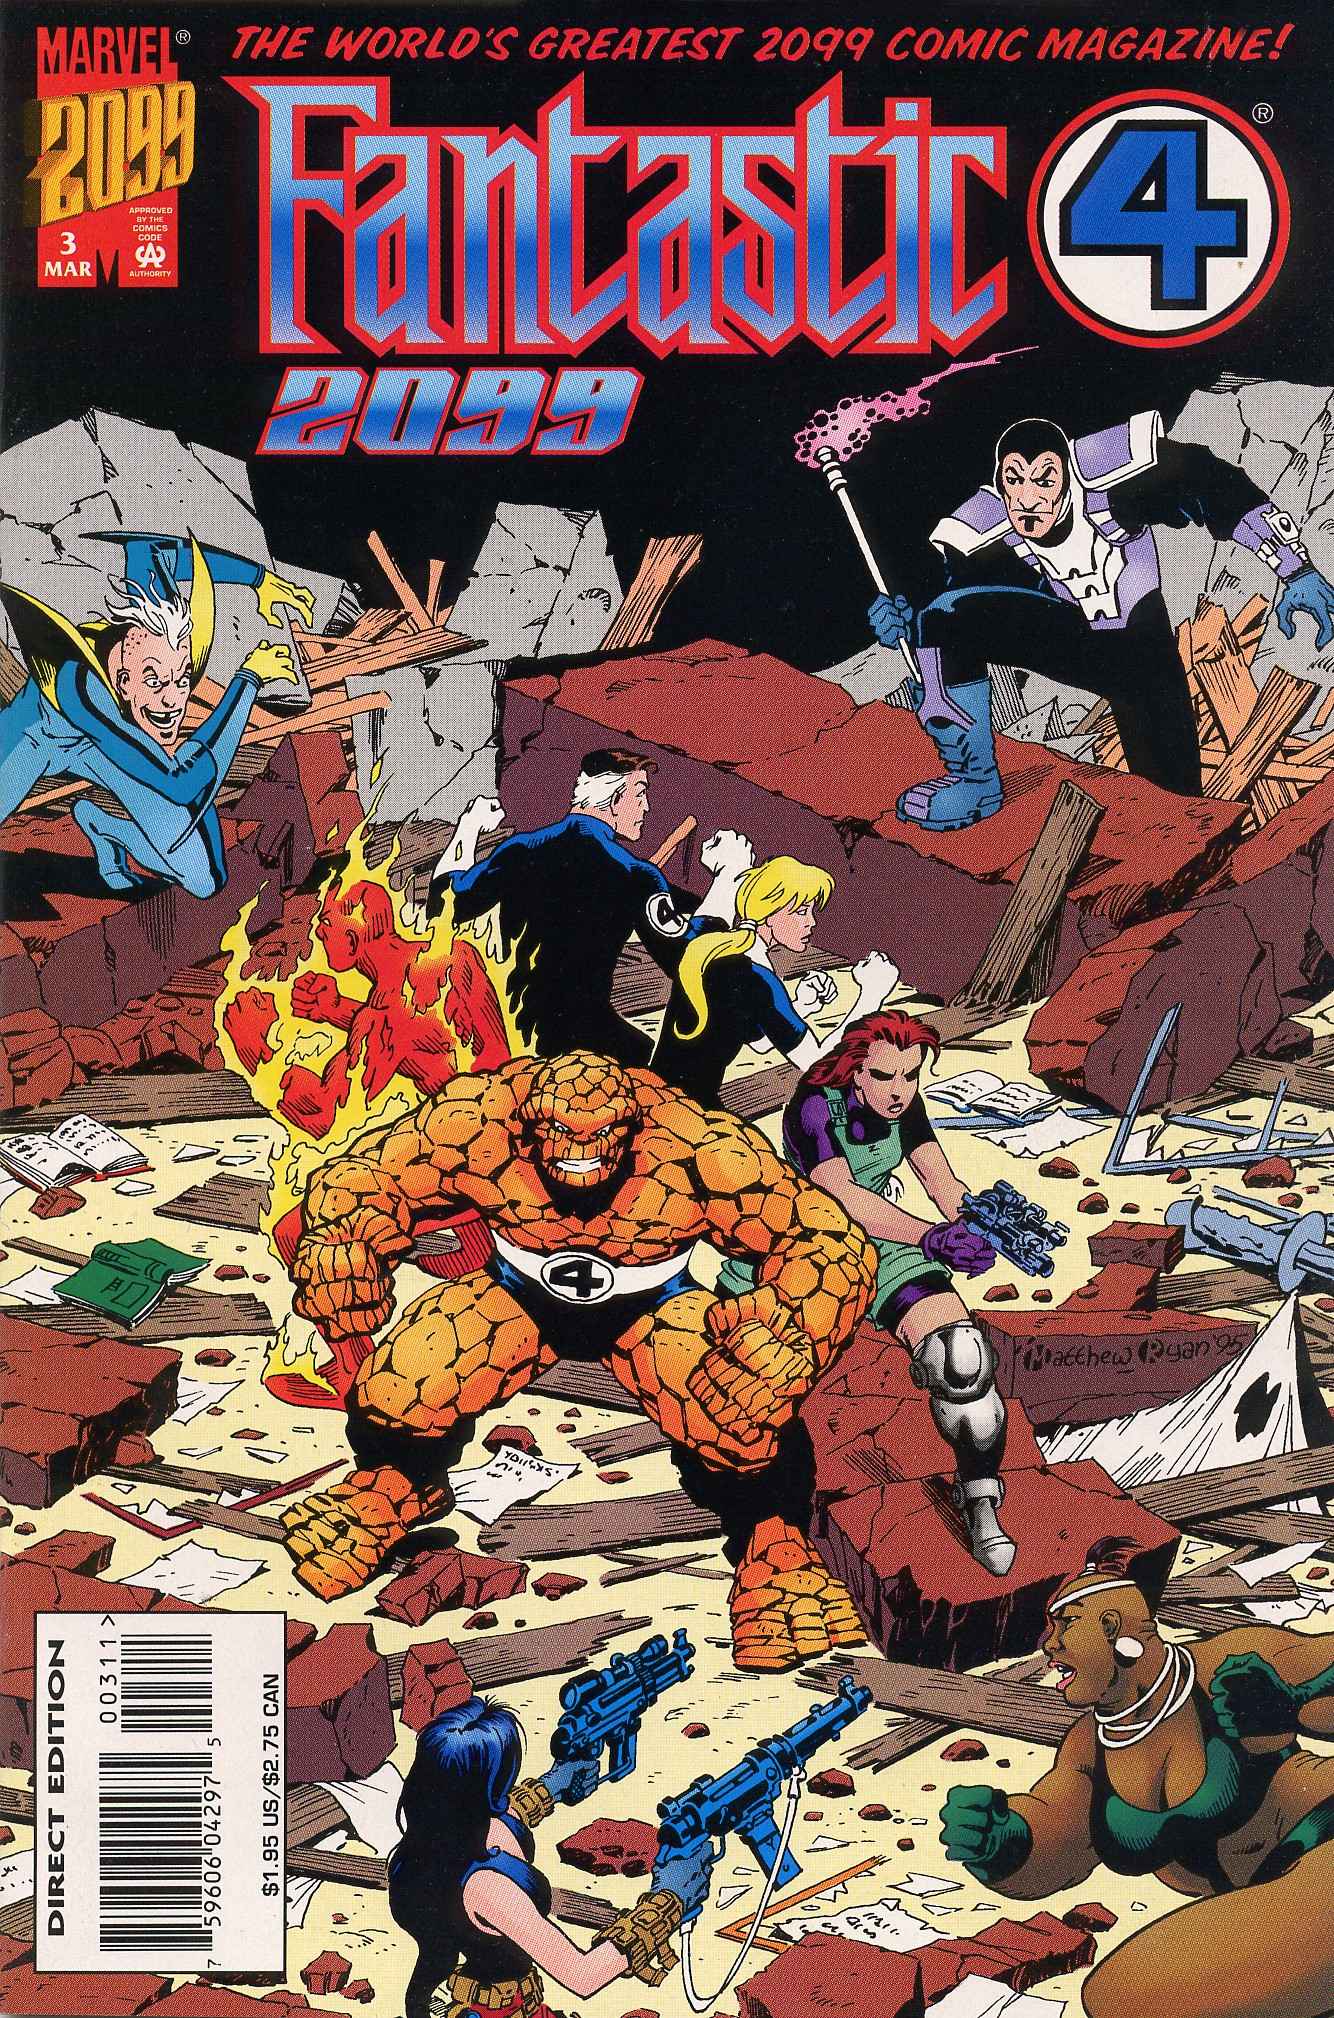 Read online Fantastic Four 2099 comic -  Issue #3 - 1